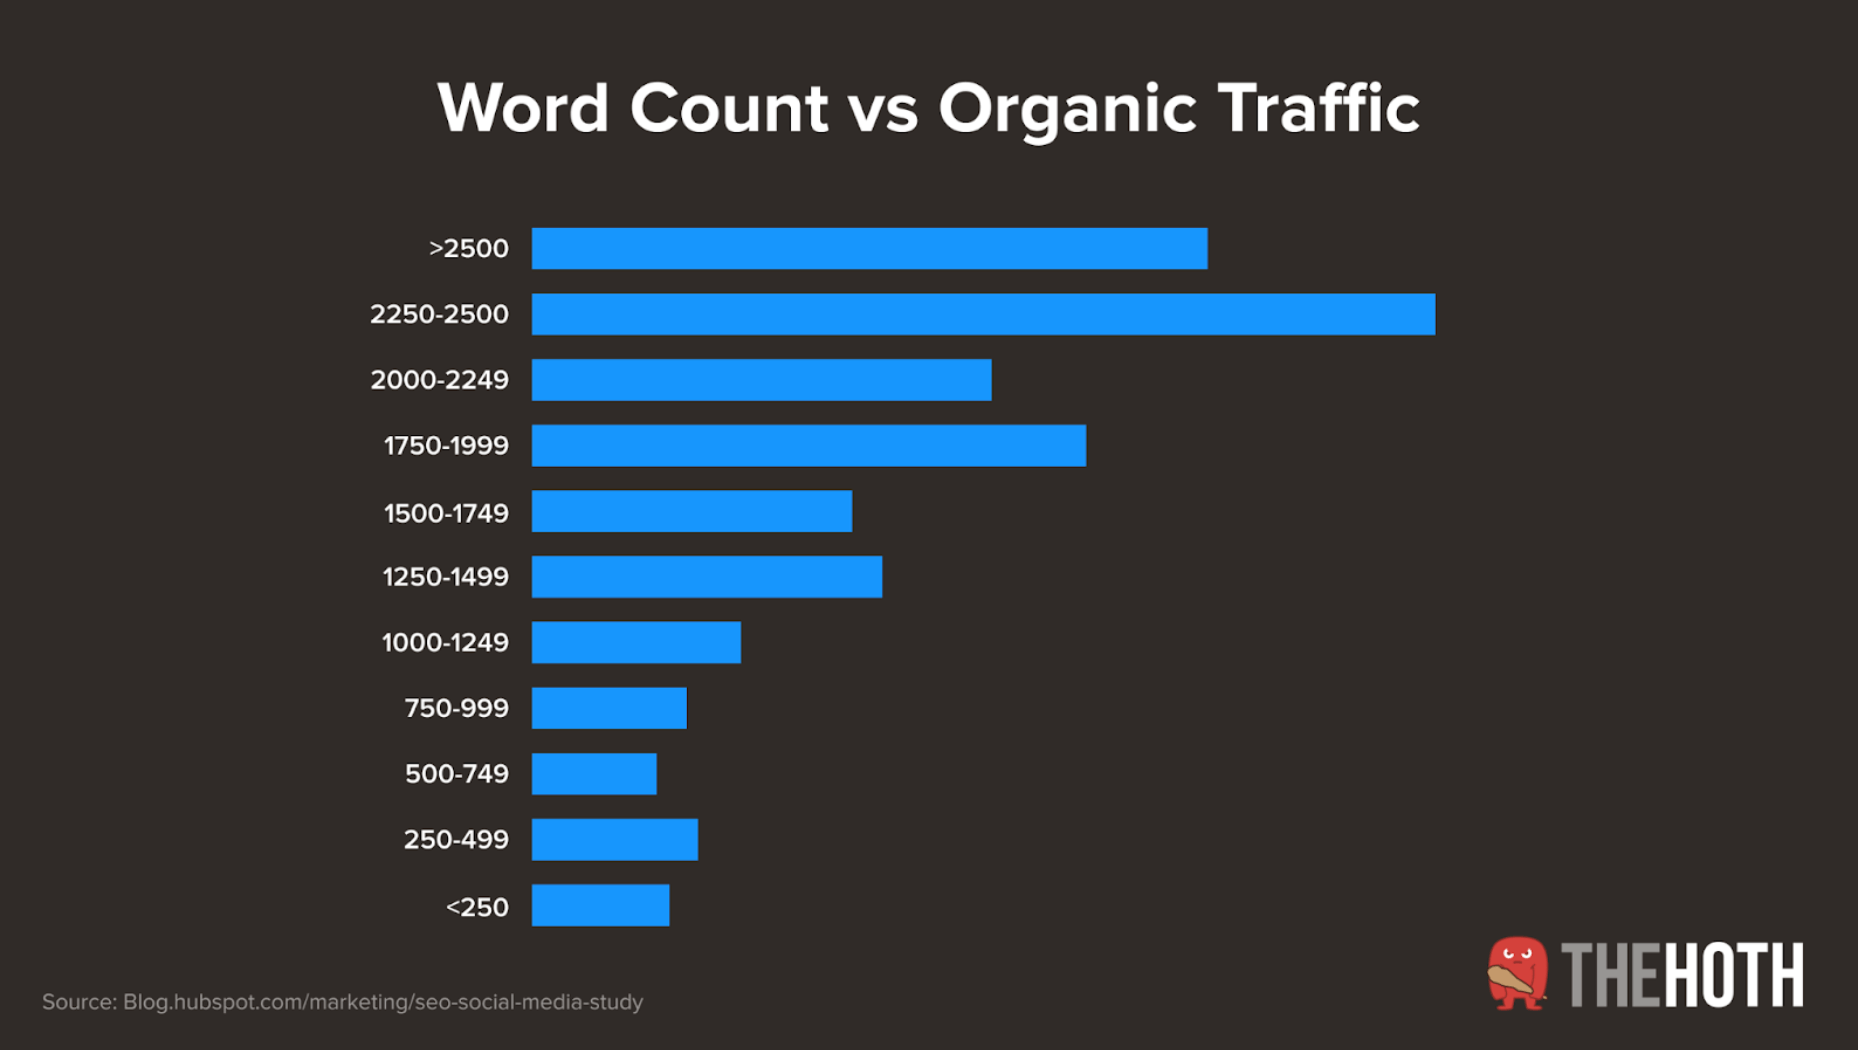 Chart showing the correlation between word count and organic traffic